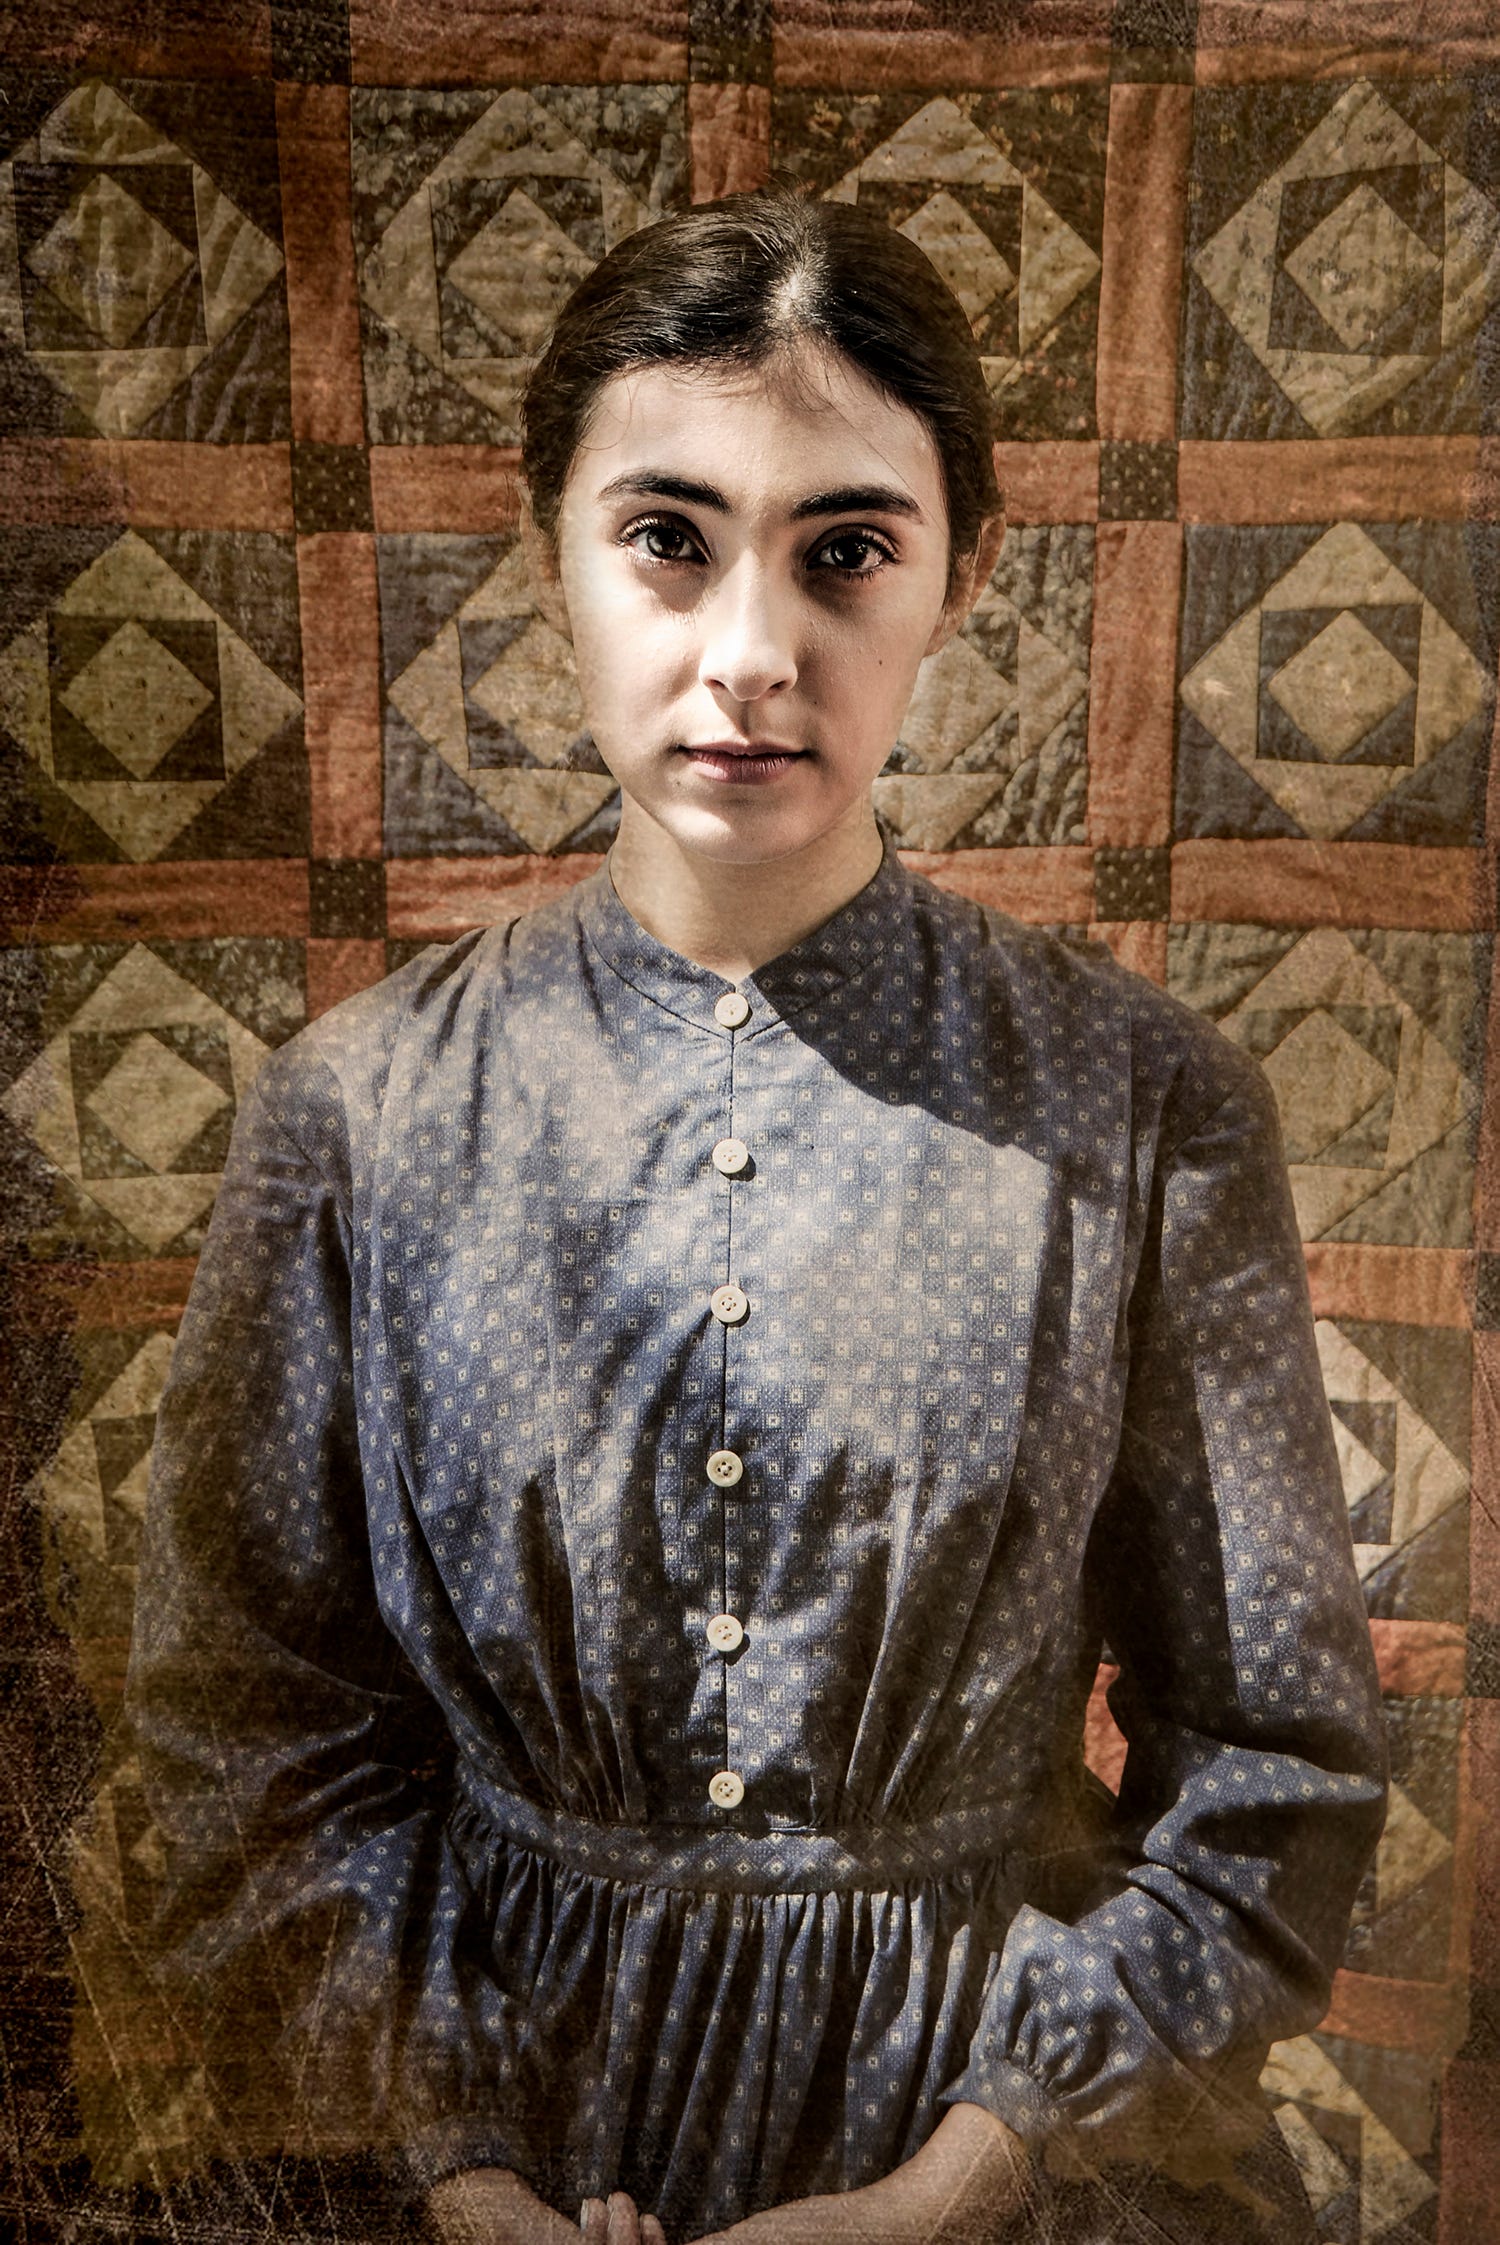 Fortov sti Fortrolig Binged it on Netflix? 5 things to know about 'Alias Grace' on UT stage